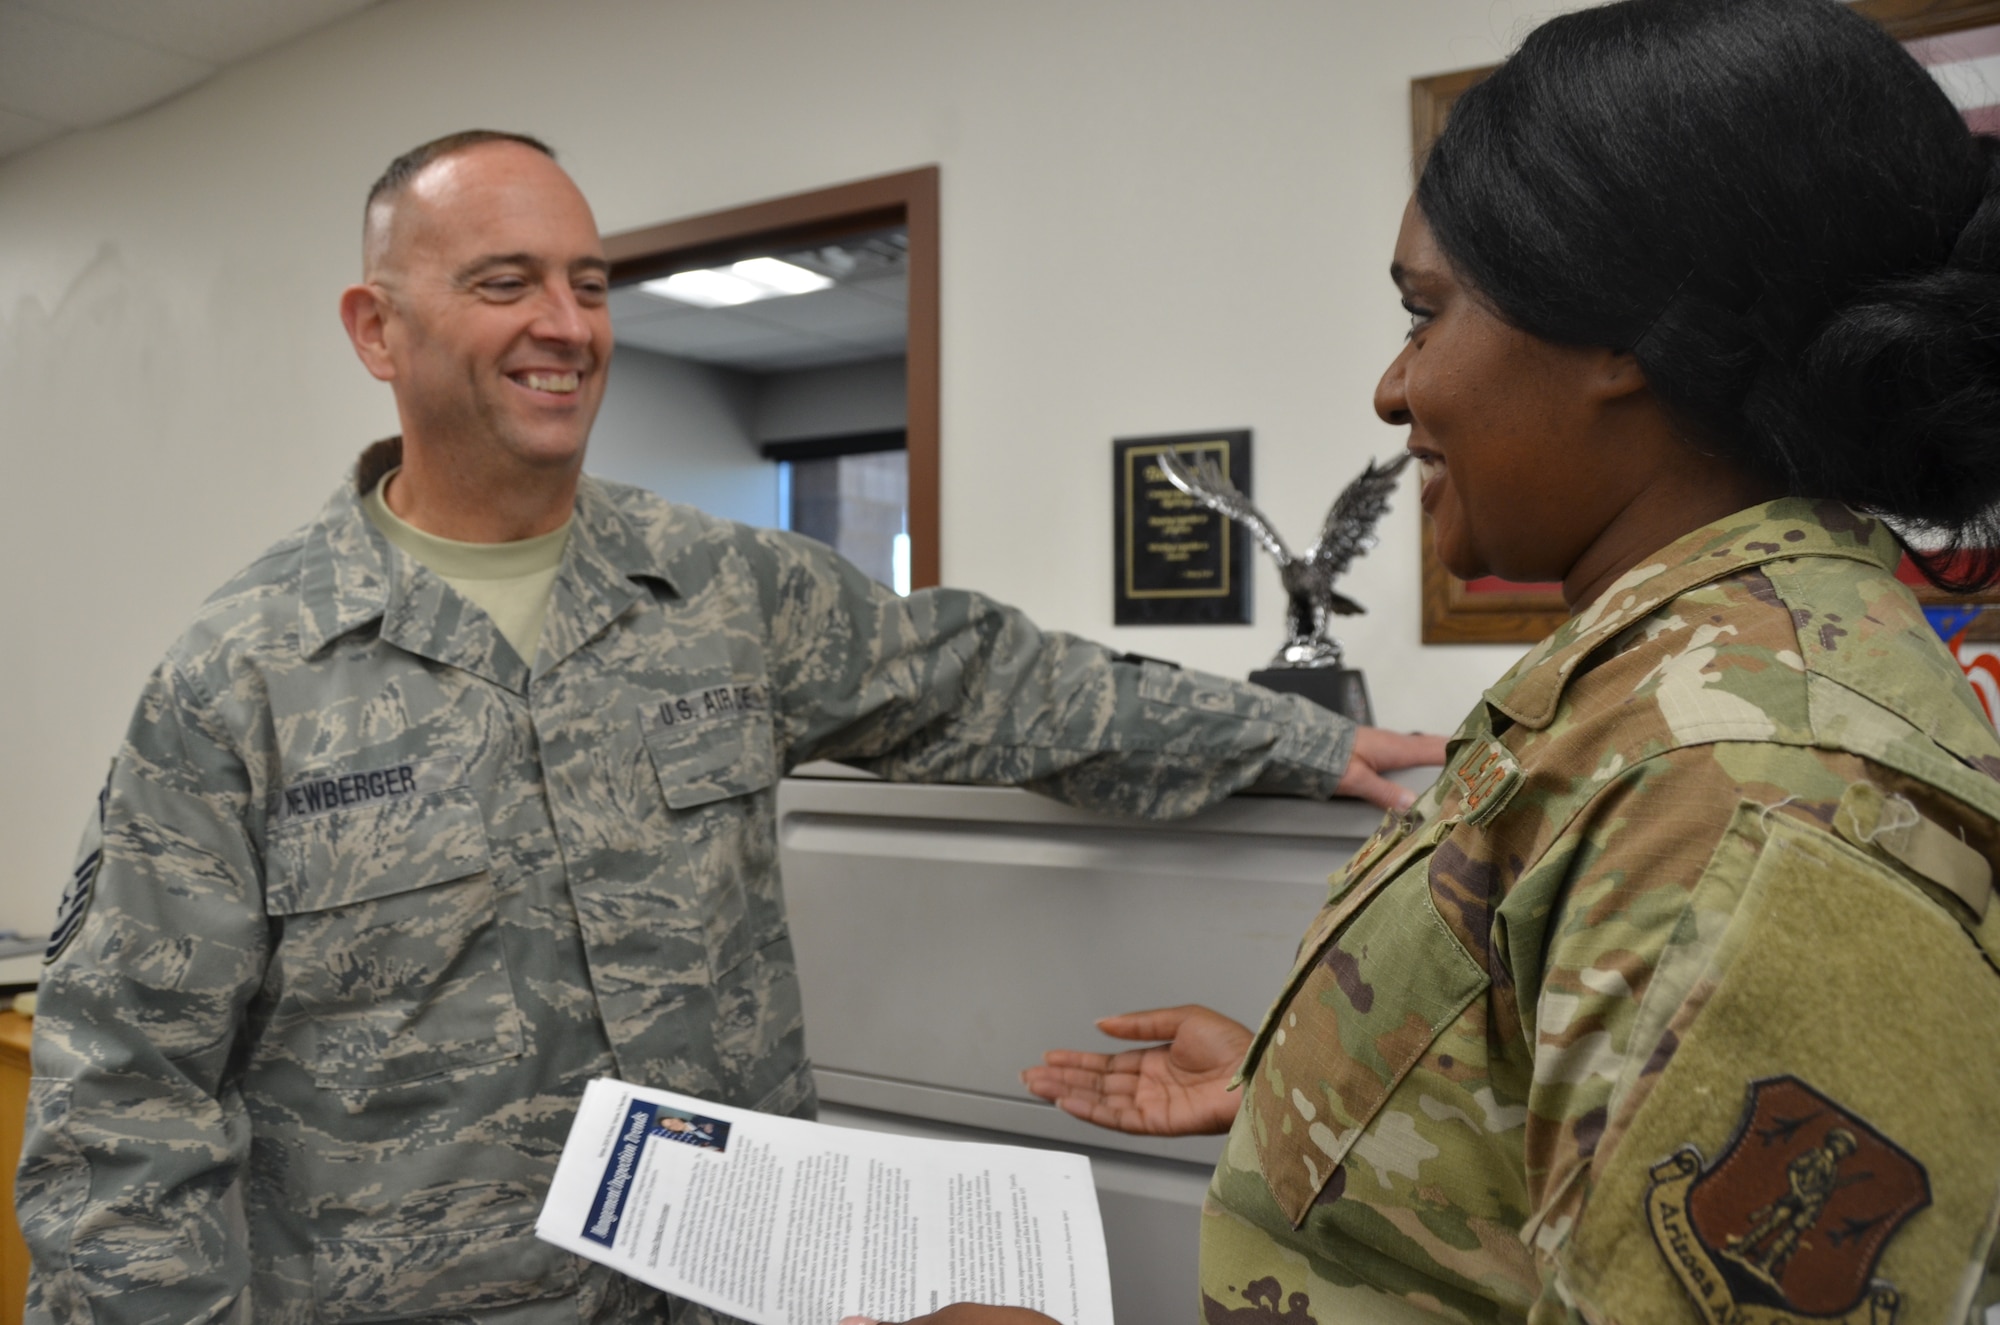 Senior Master Sgt. Scott Newberger, left, and Staff Sgt. Victoria Linder, right, members of the Wing's Diversity and Inclusion Council, discuss strategy on upcoming meetings over Unit Training Assembly, Phoenix, Ariz., November 2, 2019. (U.S. Air National Guard photo by Capt. Tinashe Machona)